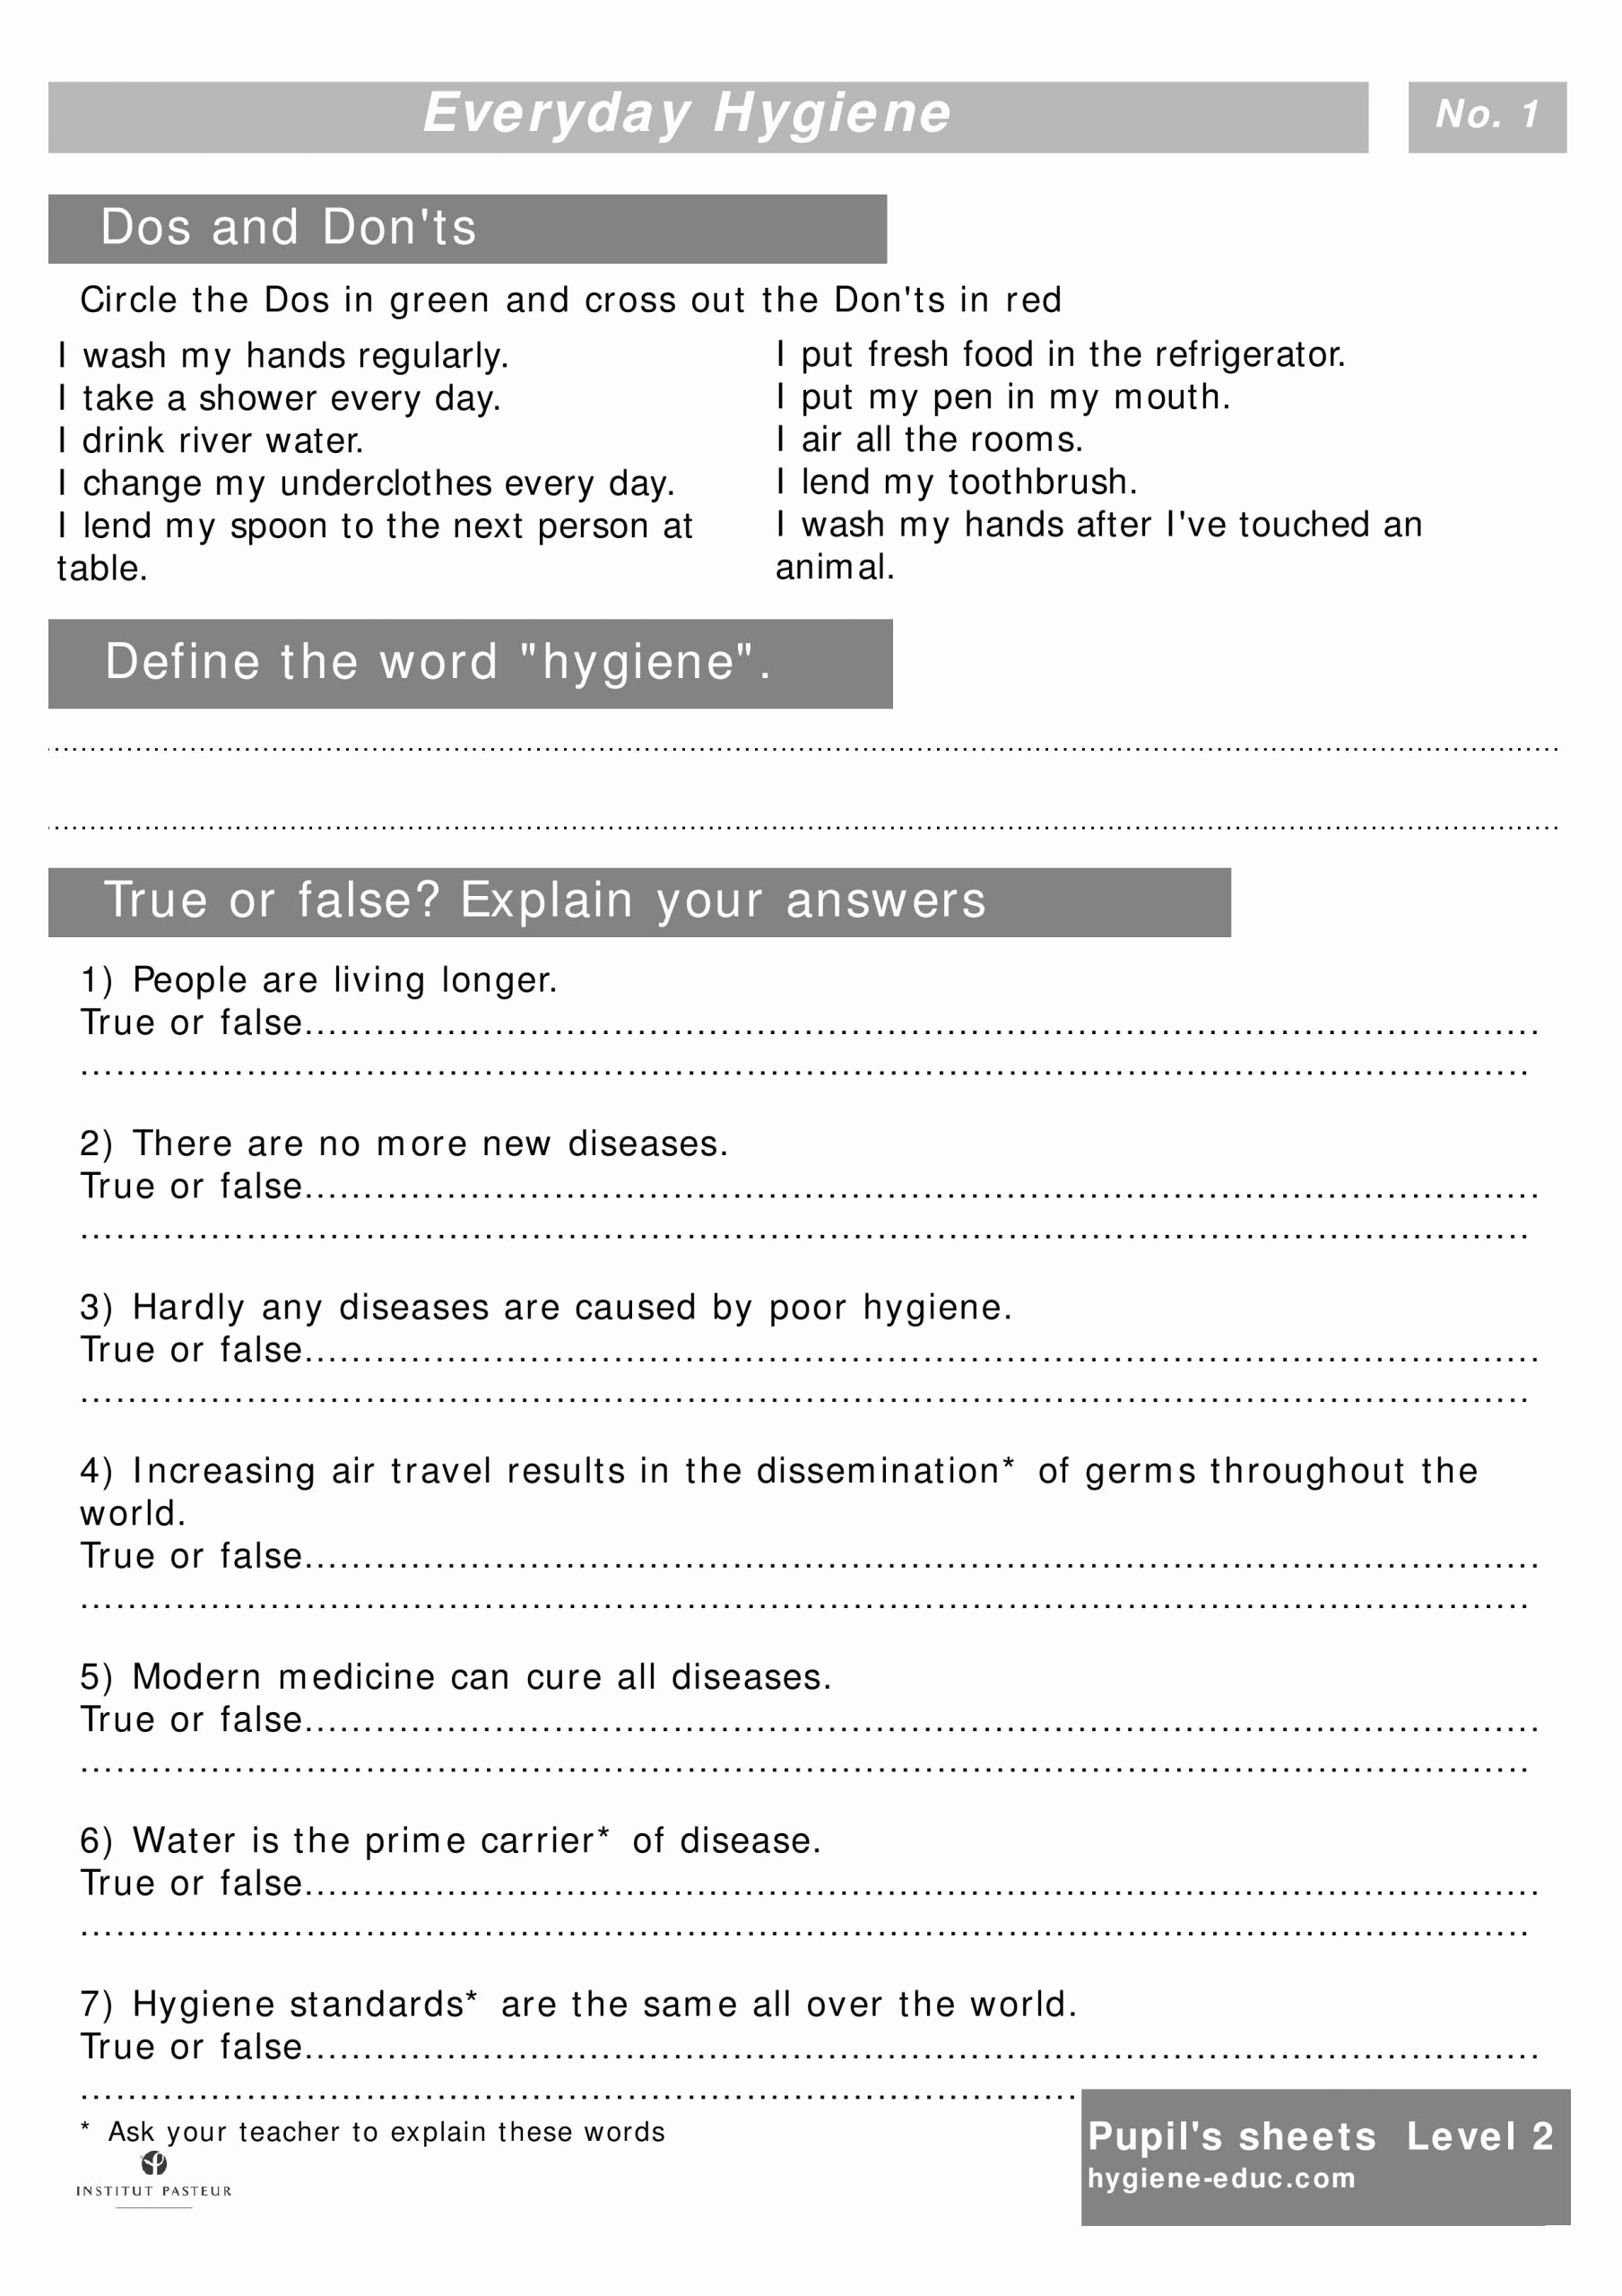 Middle School Health Worksheets New Middle School Health Worksheets Pdf Everyday Hygiene